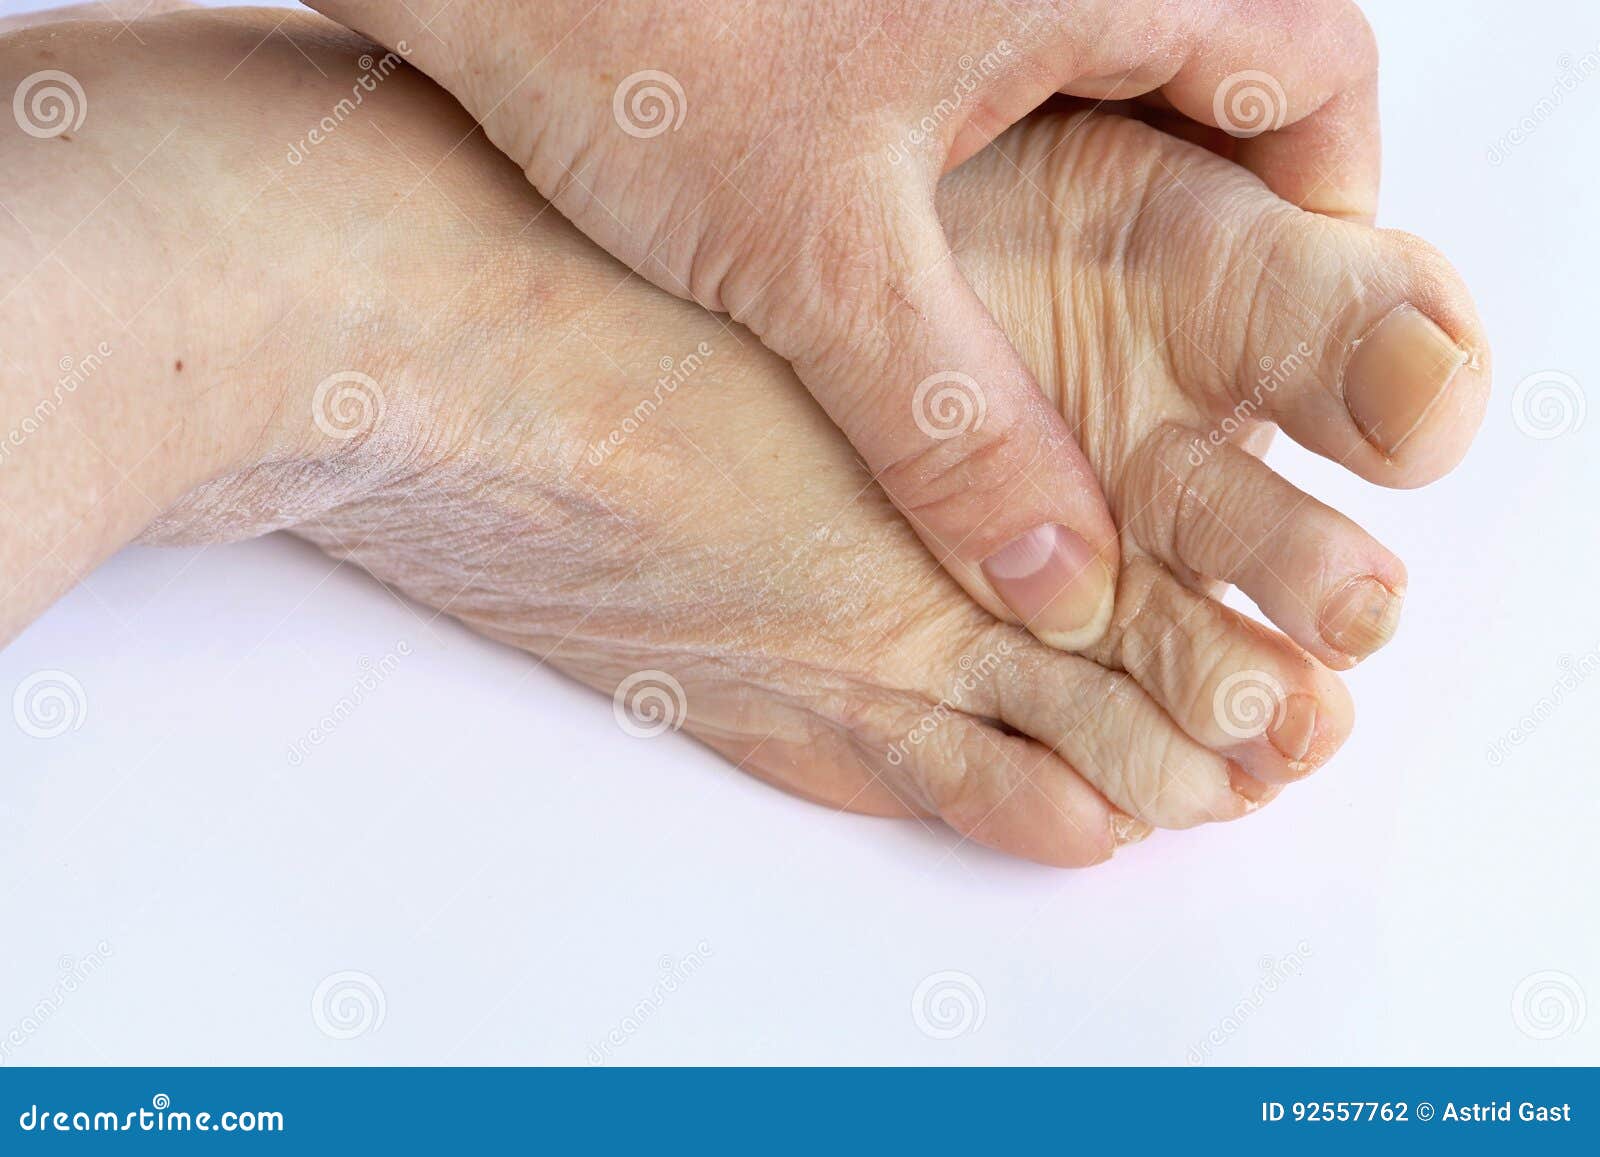 elderly woman has pain in the feet and toes